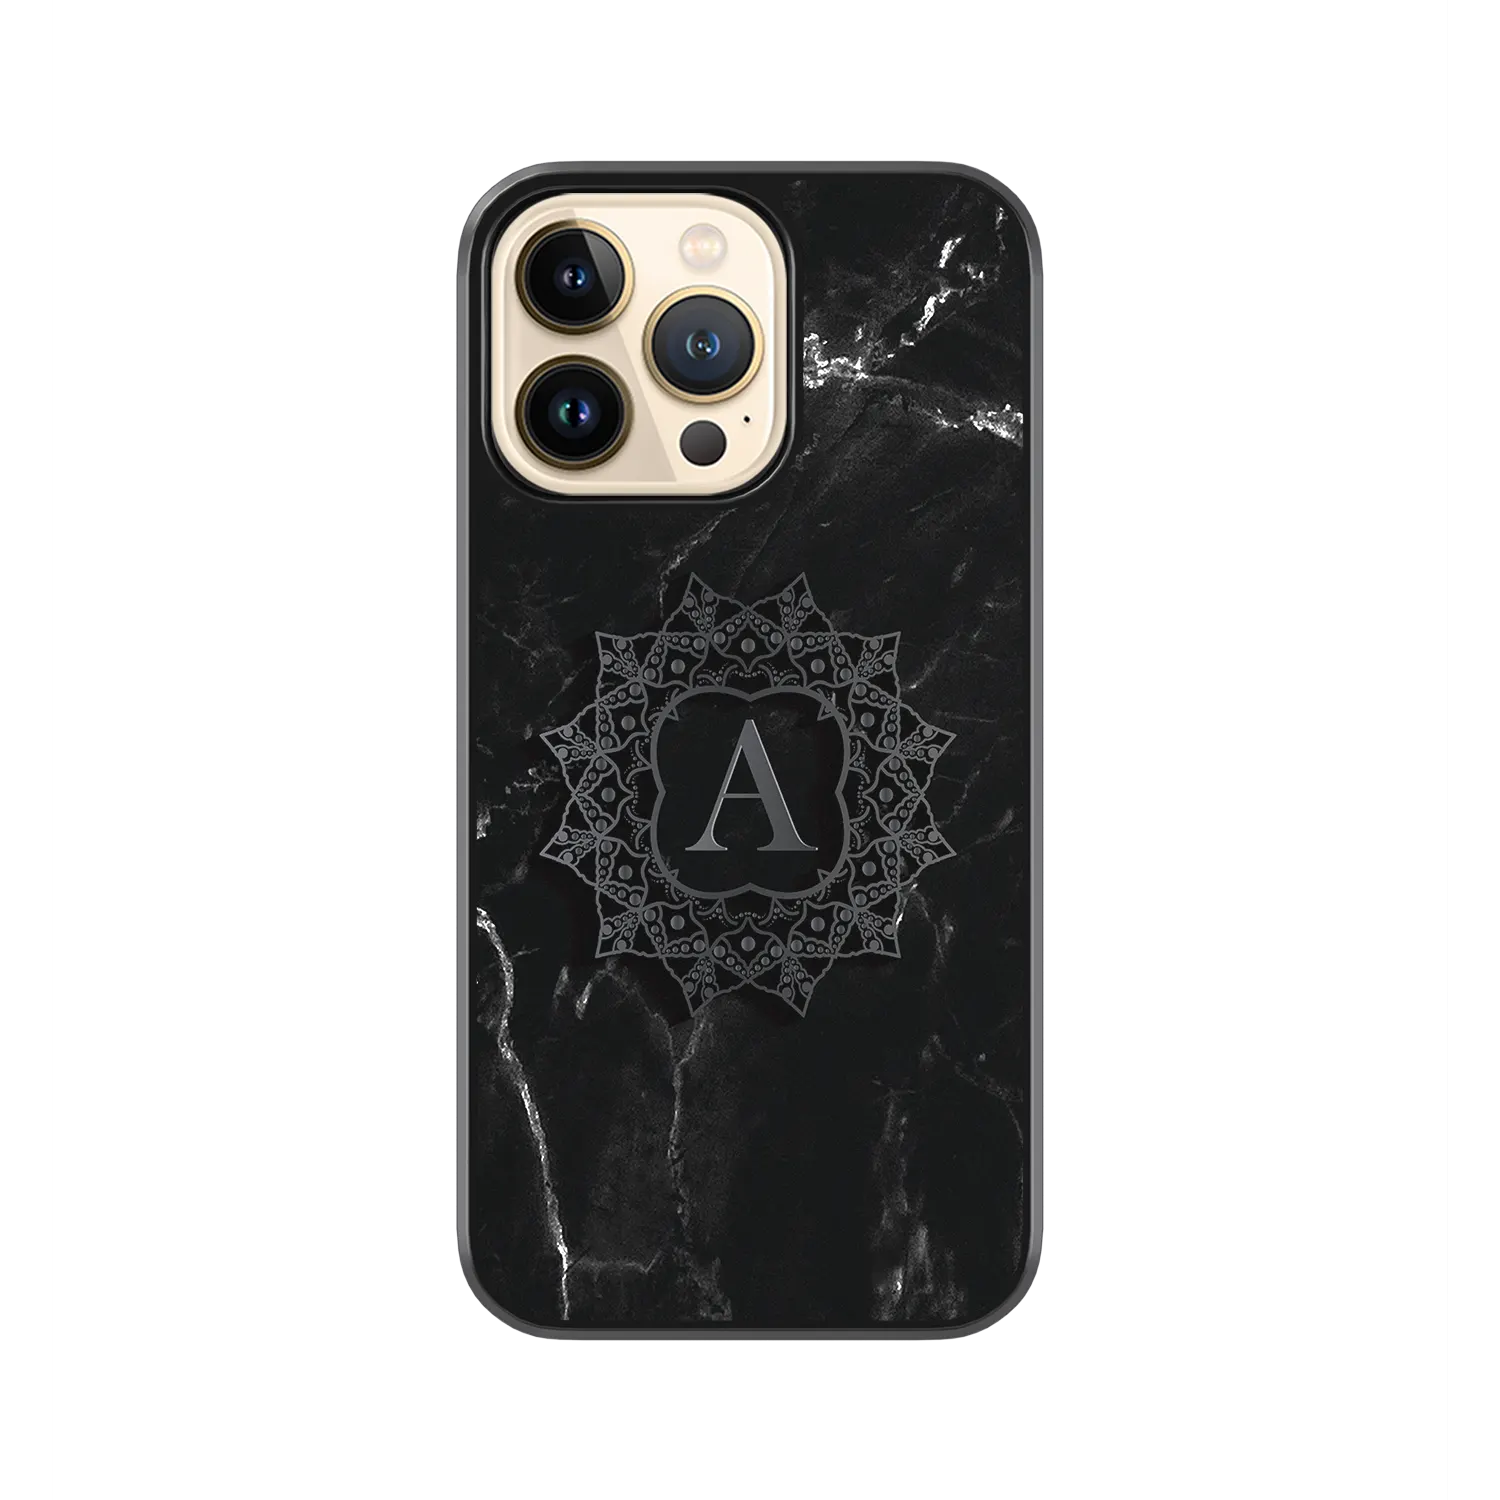 Achlys iphone 12 pro max cover